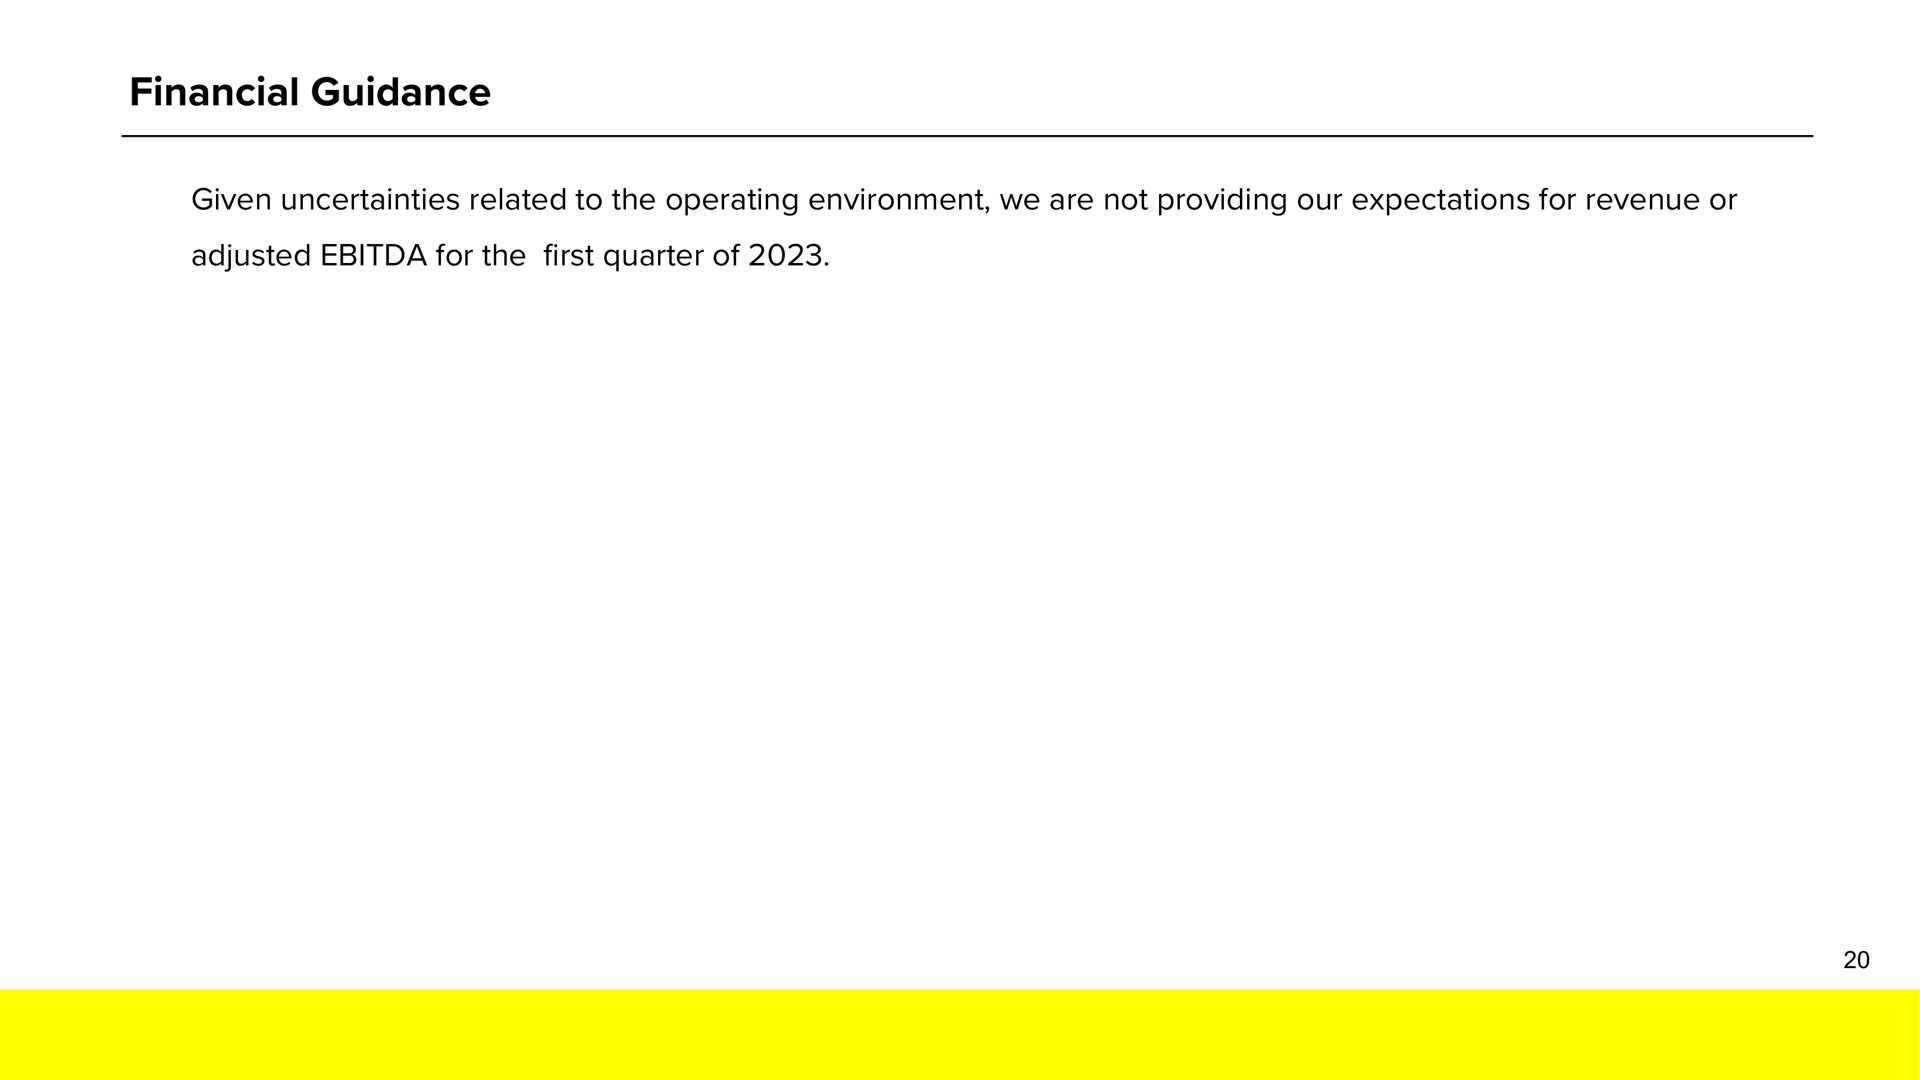 financial guidance given uncertainties related to the operating environment we are not providing our expectations for revenue or adjusted for the first quarter of | Snap Inc